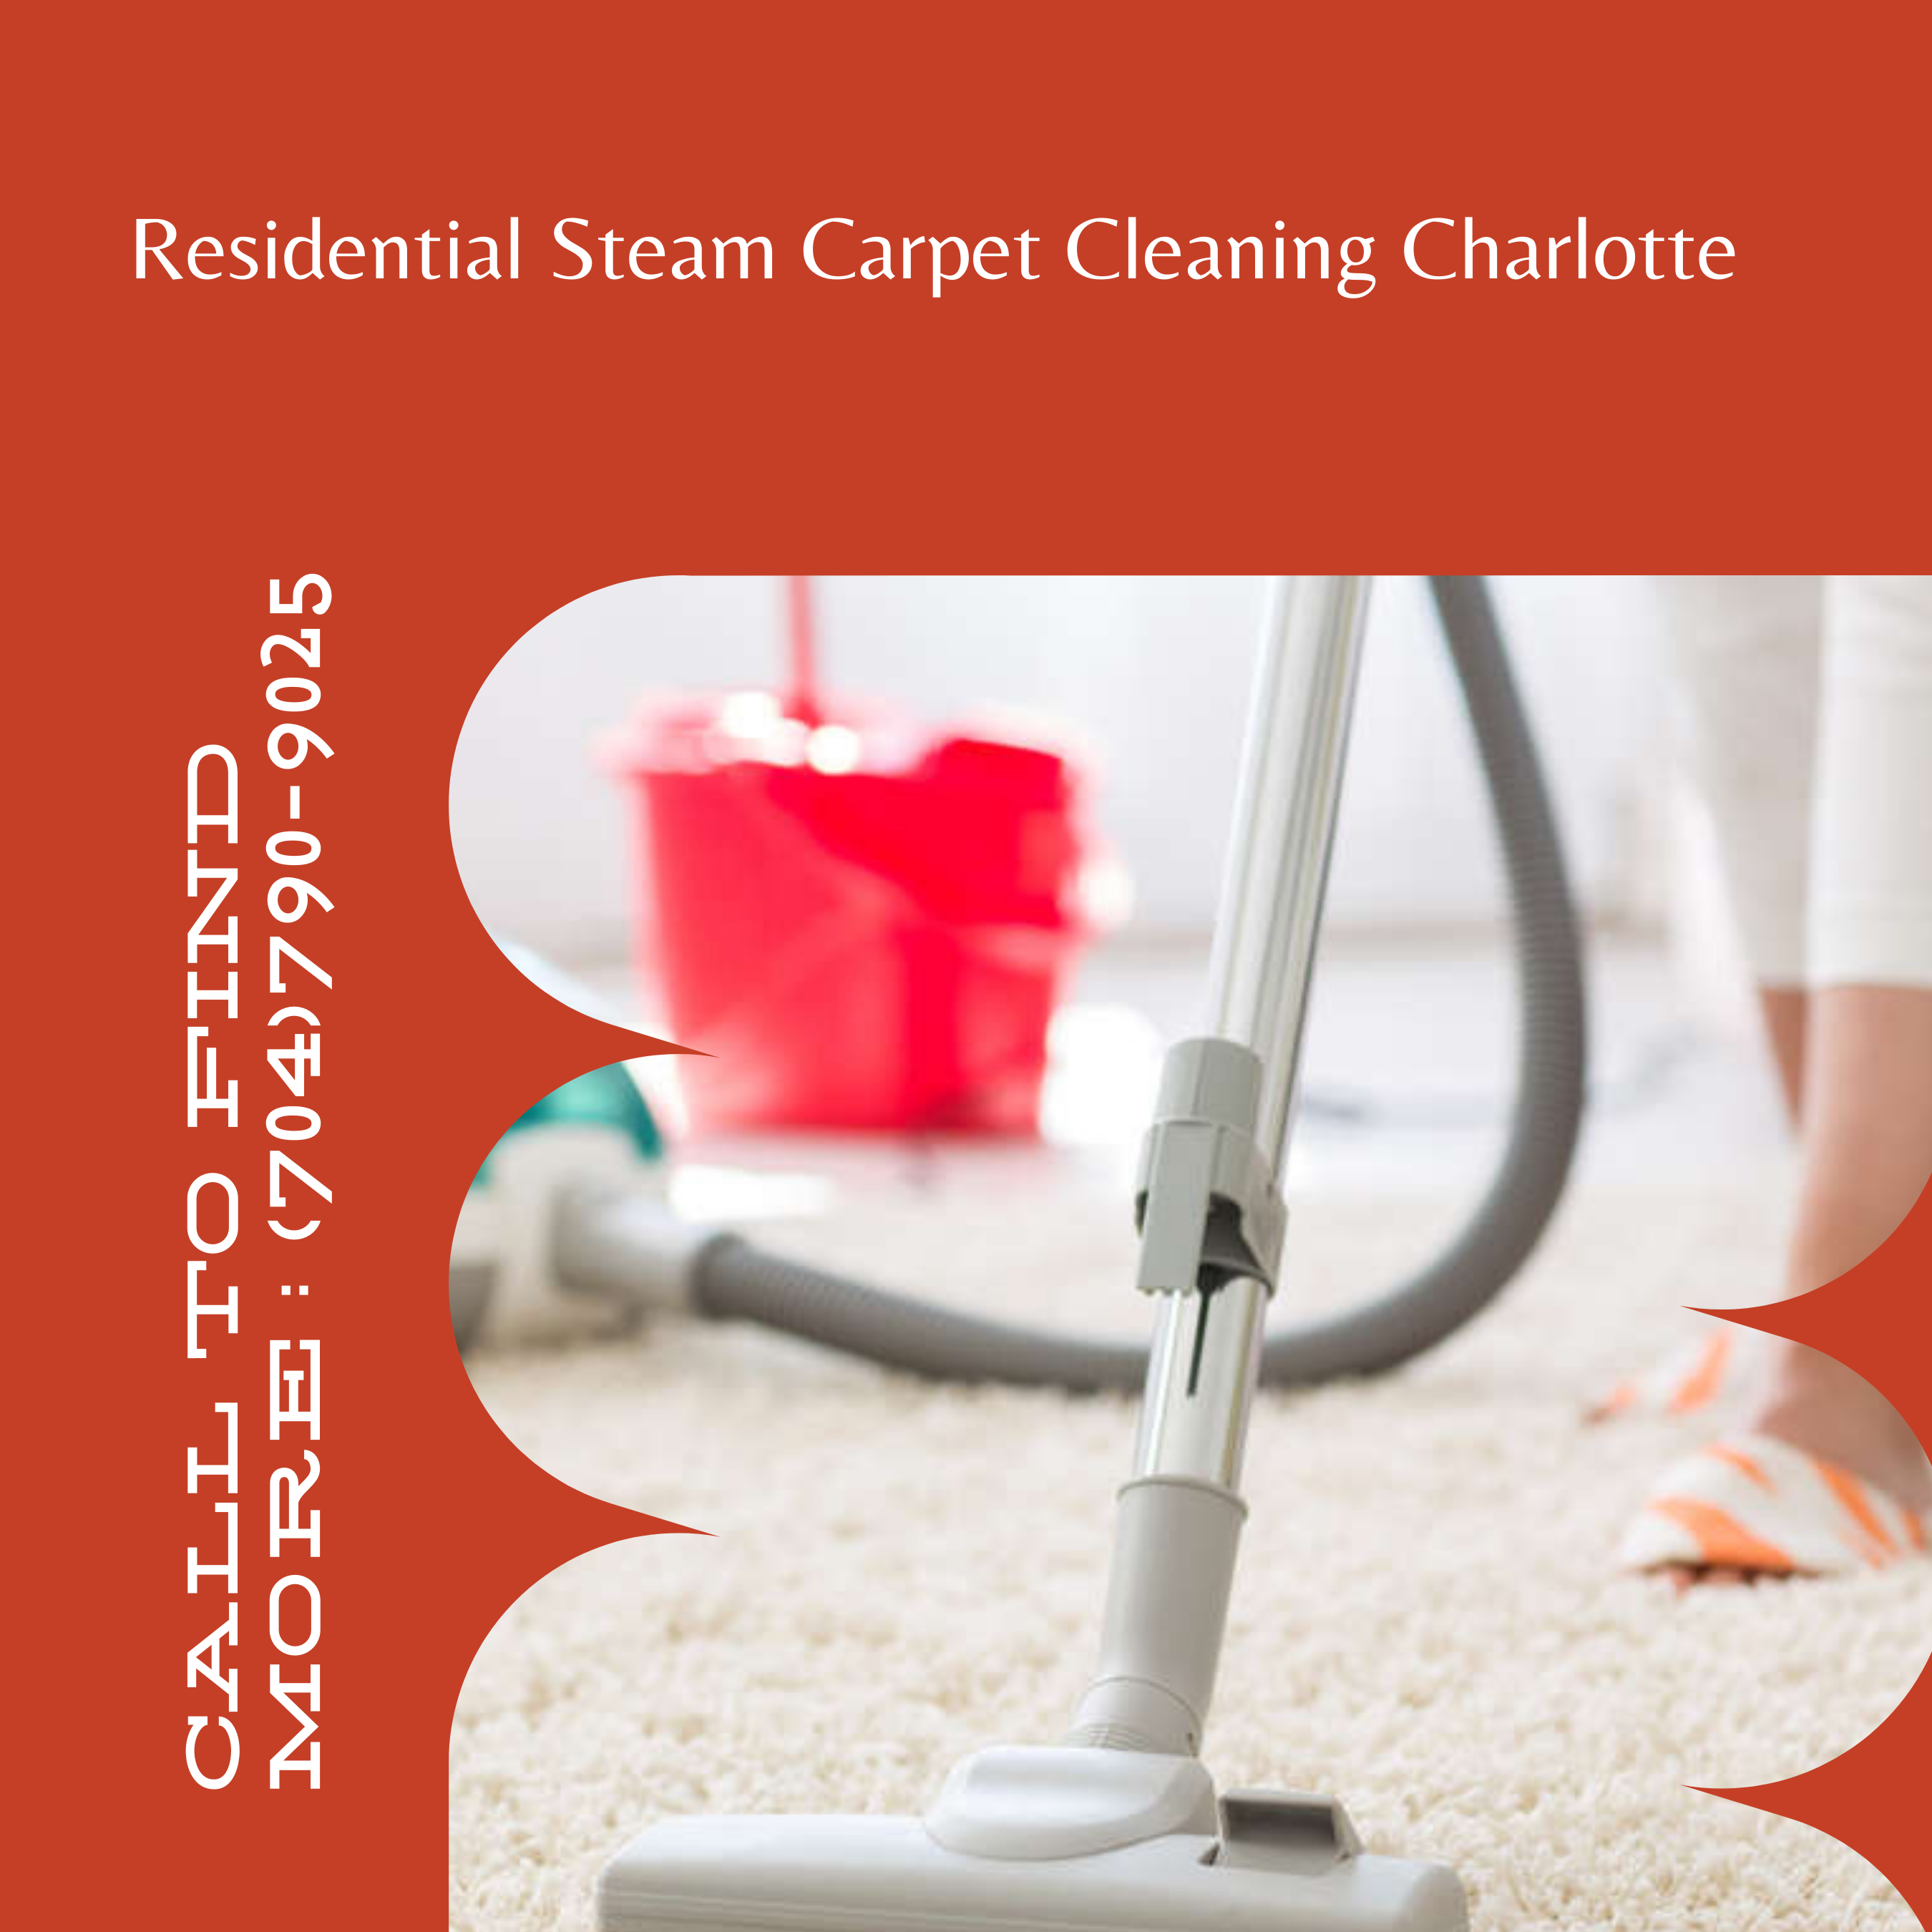 residential steam carpet cleaning Charlotte